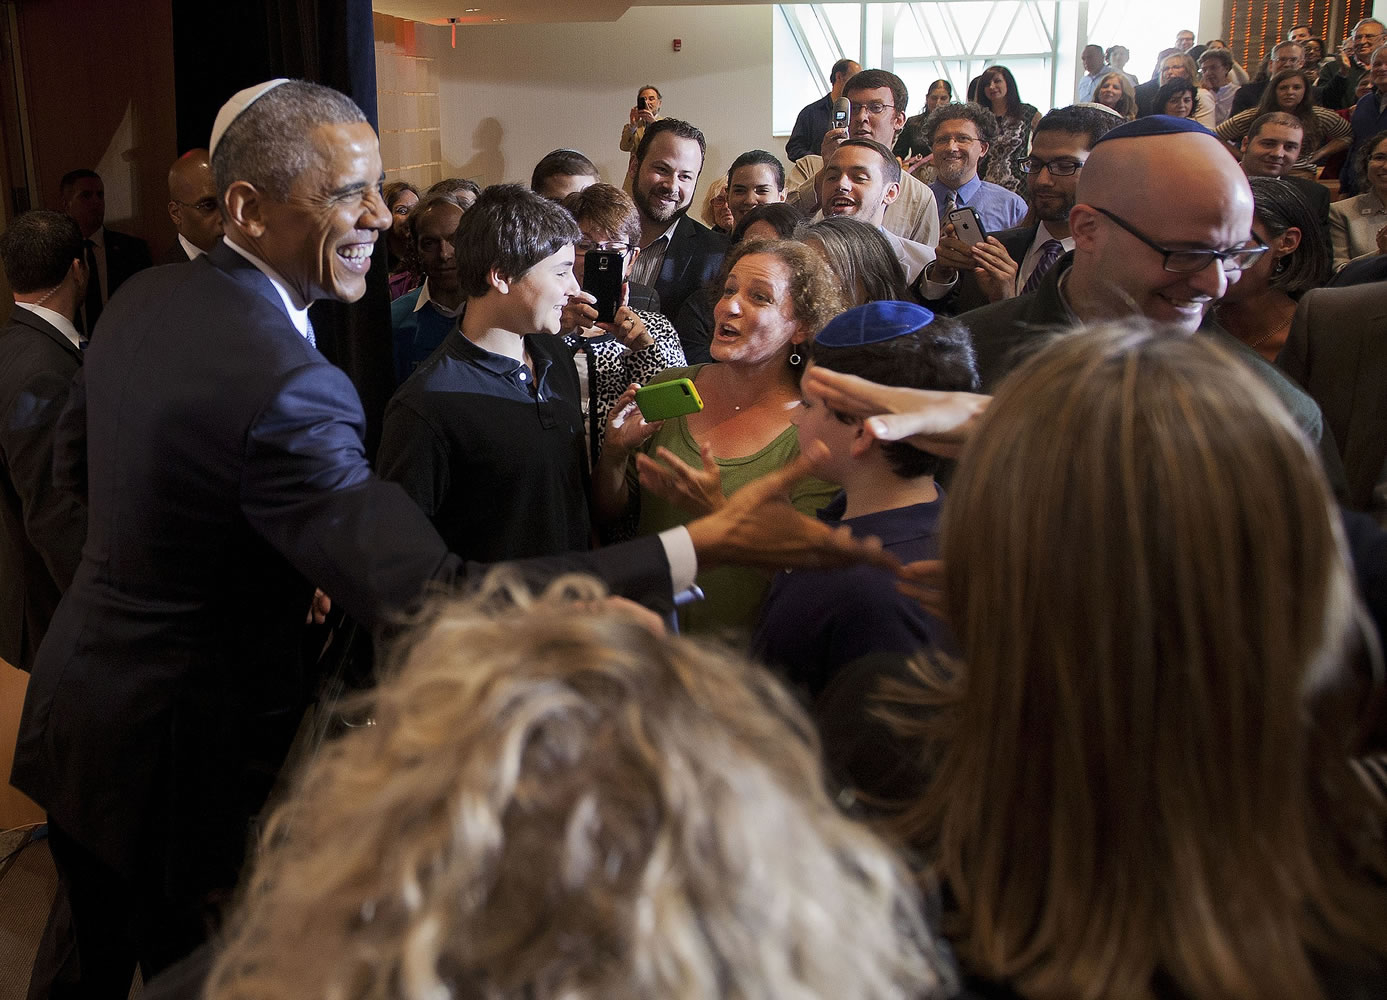 President Barack Obama greets people Friday after speaking at Adas Israel Congregation in Washington. The president addressed one of the largest Jewish congregations in Washington to highlight efforts to combat anti-Semitism, a problem he says has created an intimidating environment worldwide for Jewish families.